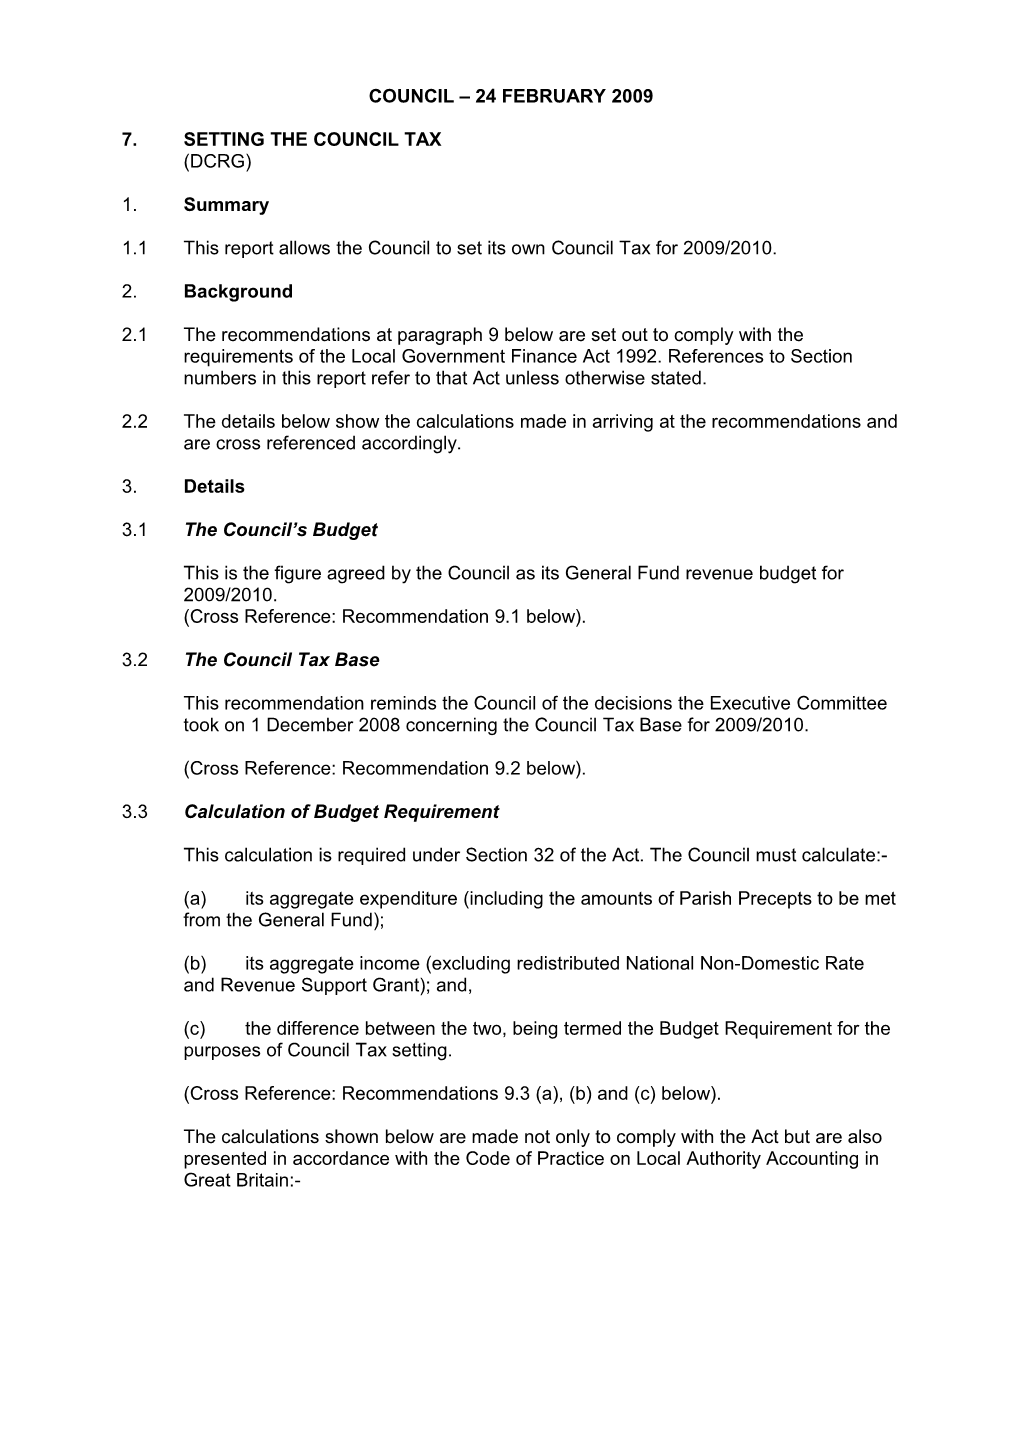 7.Setting the Council Tax